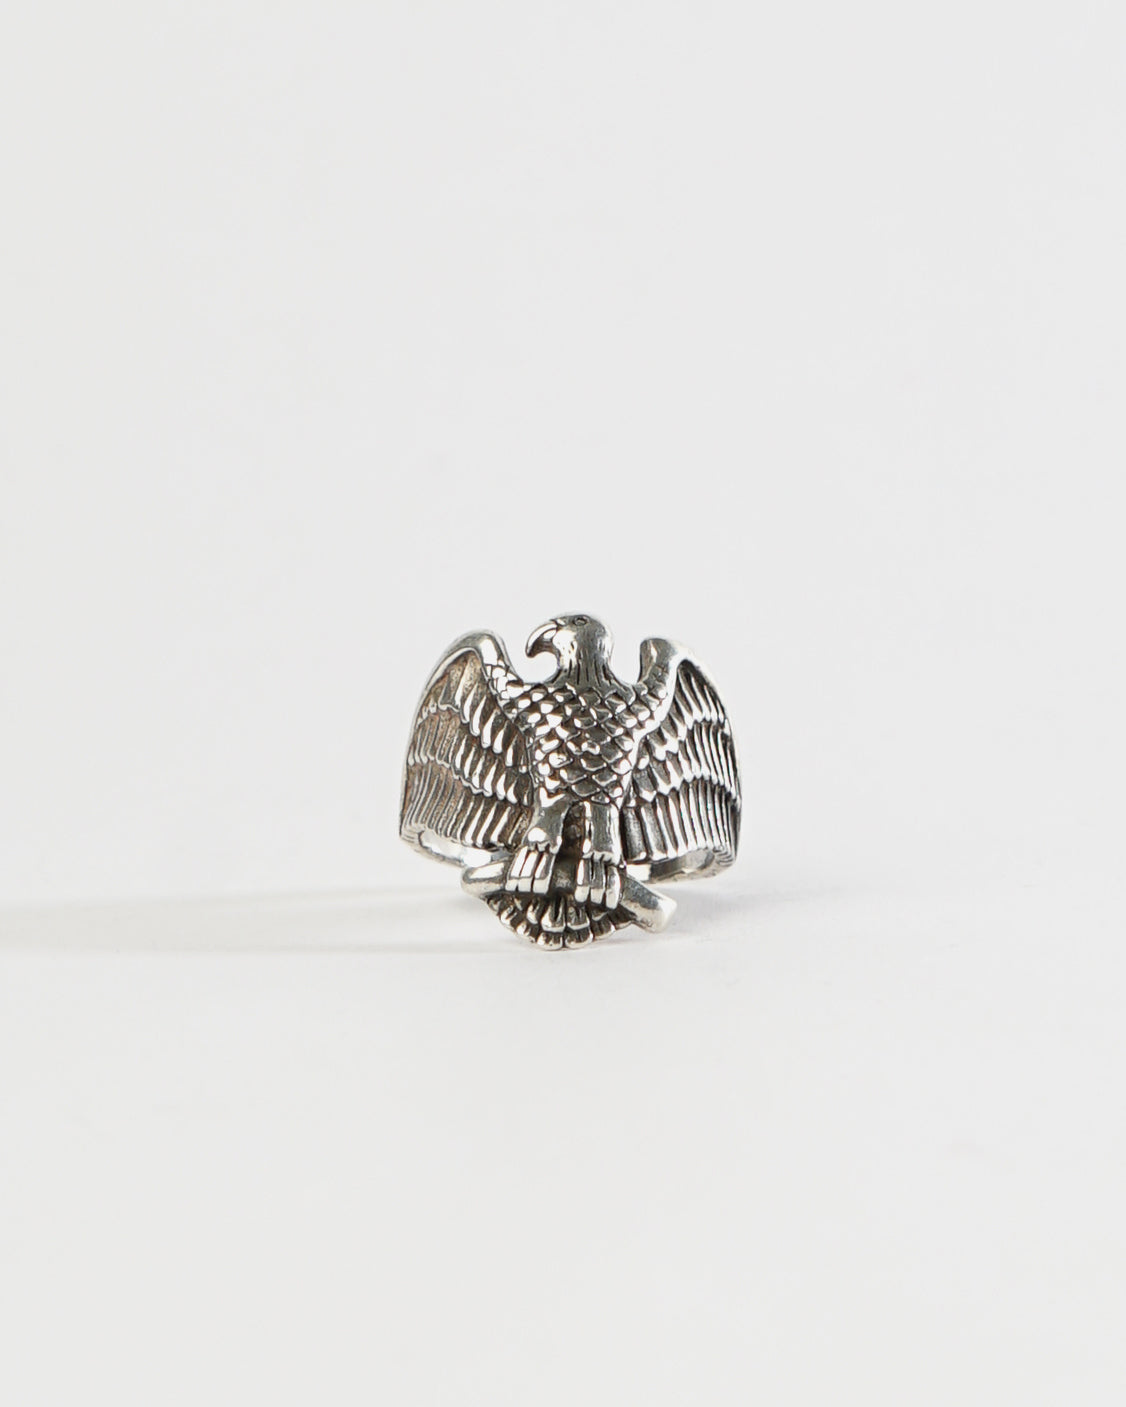 Silver Ring / size: 12.5